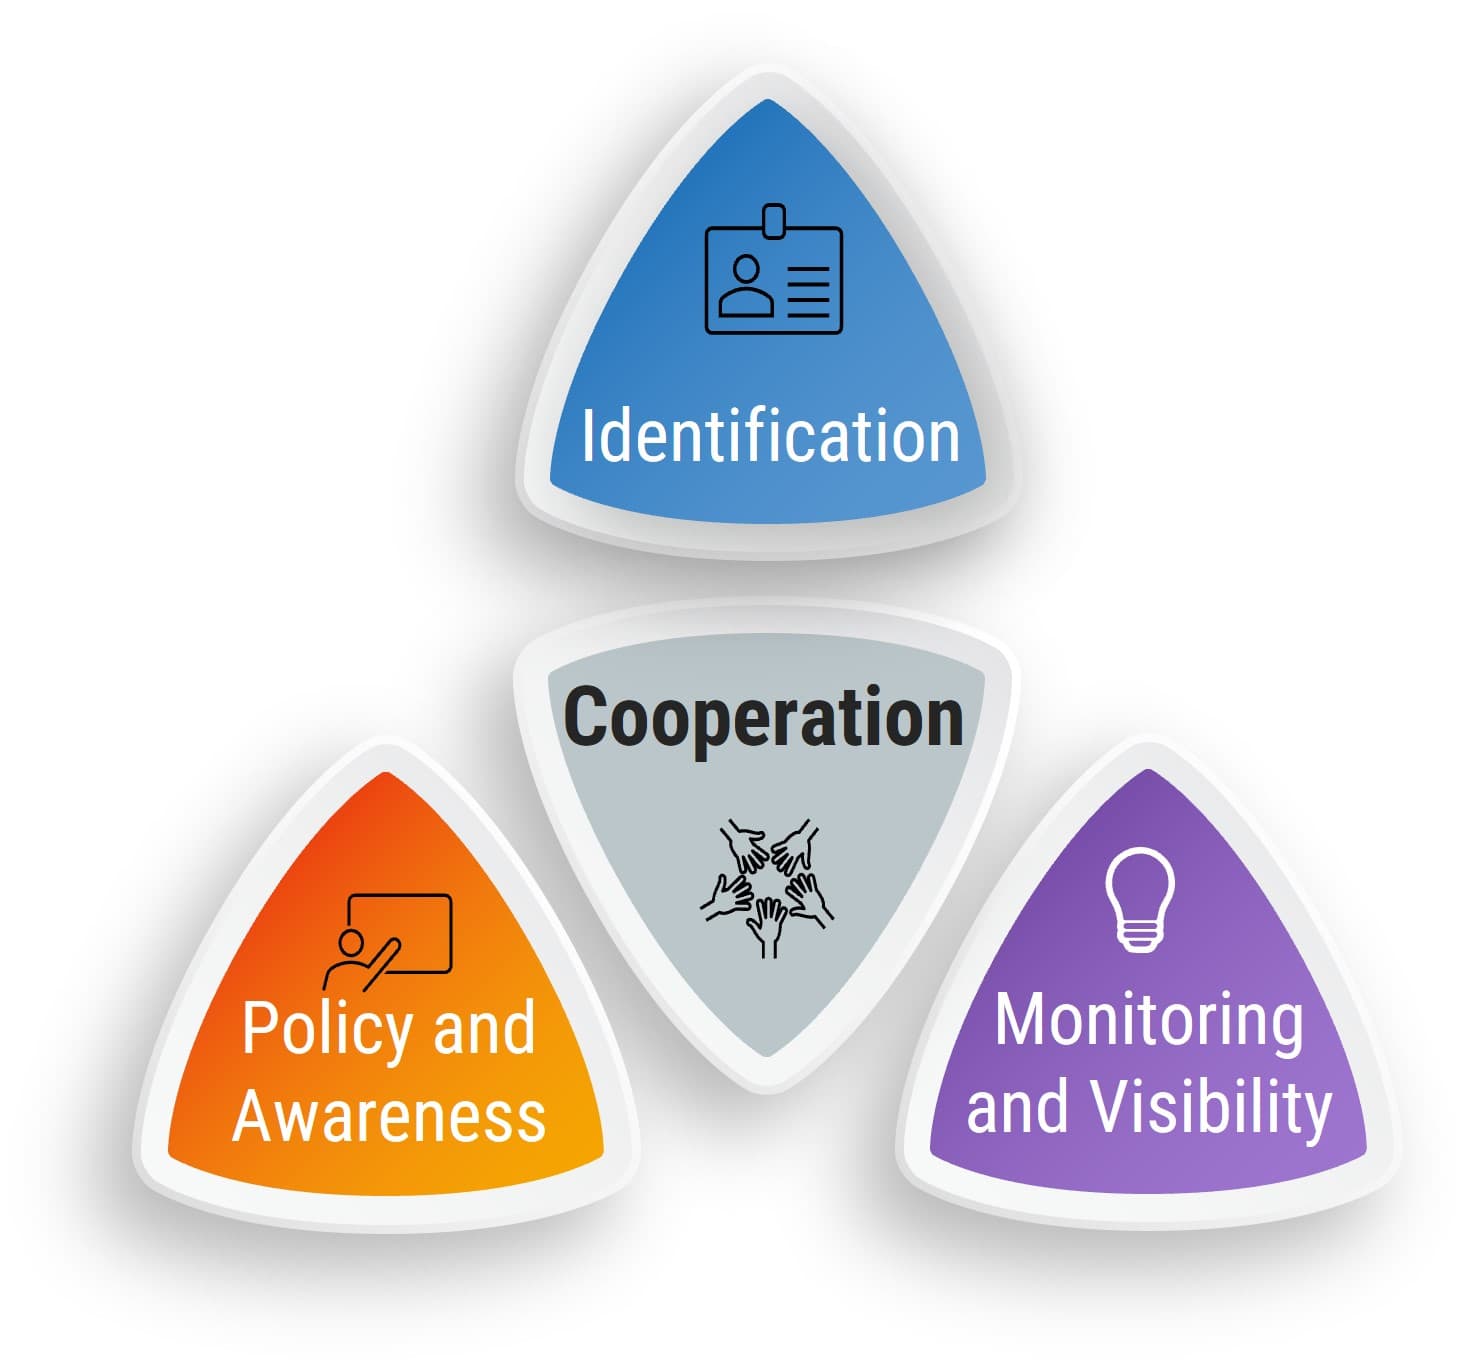 The image contains a picture of the Gap Controls. The controls include: Policy and Awareness, Identification, Monitoring and Visibility, which leads to Cooperation.